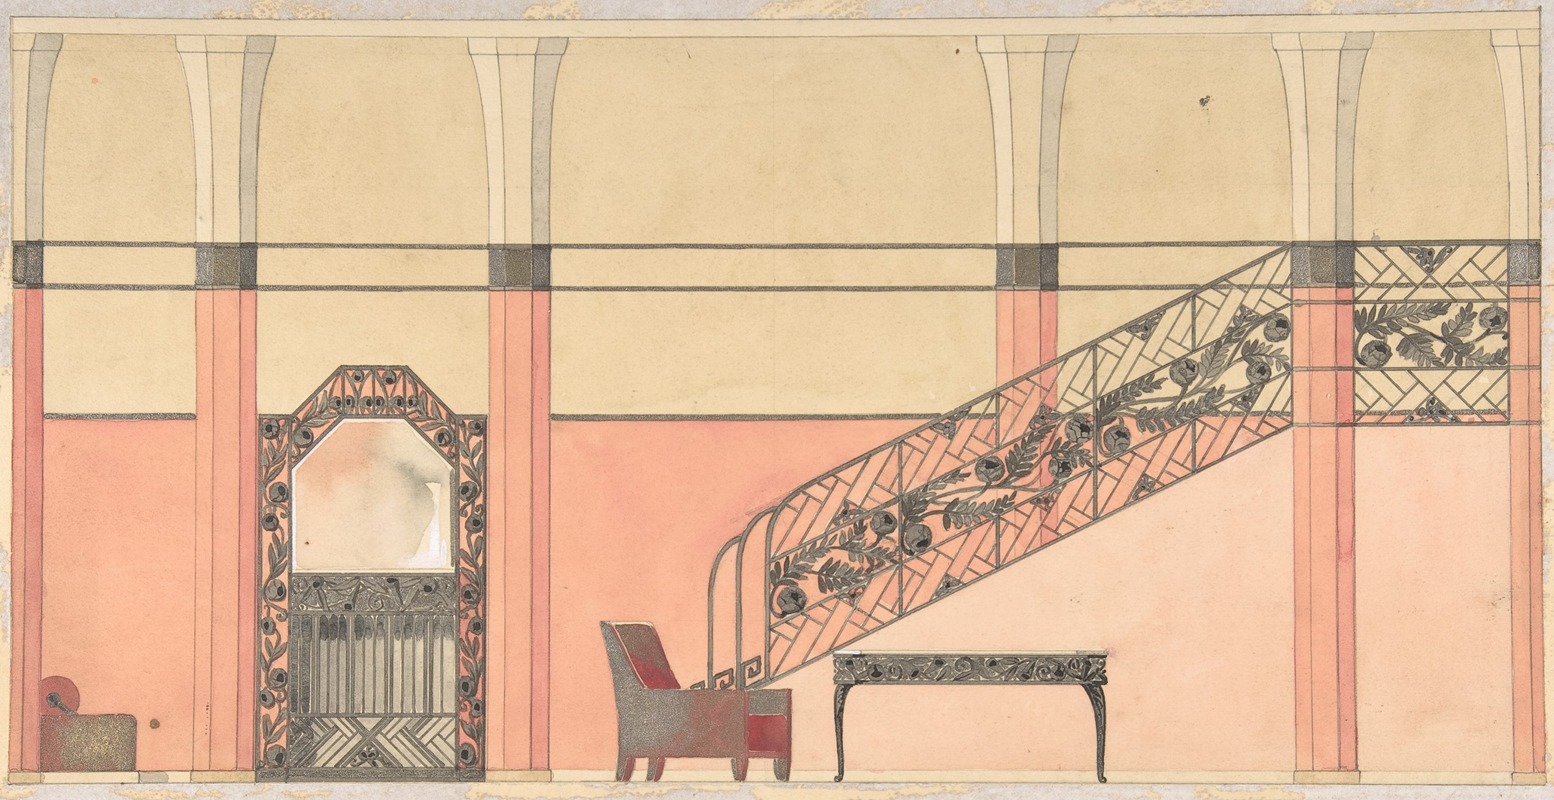 Georges de Feure - Design for a Hallway with Wrought-iron Details